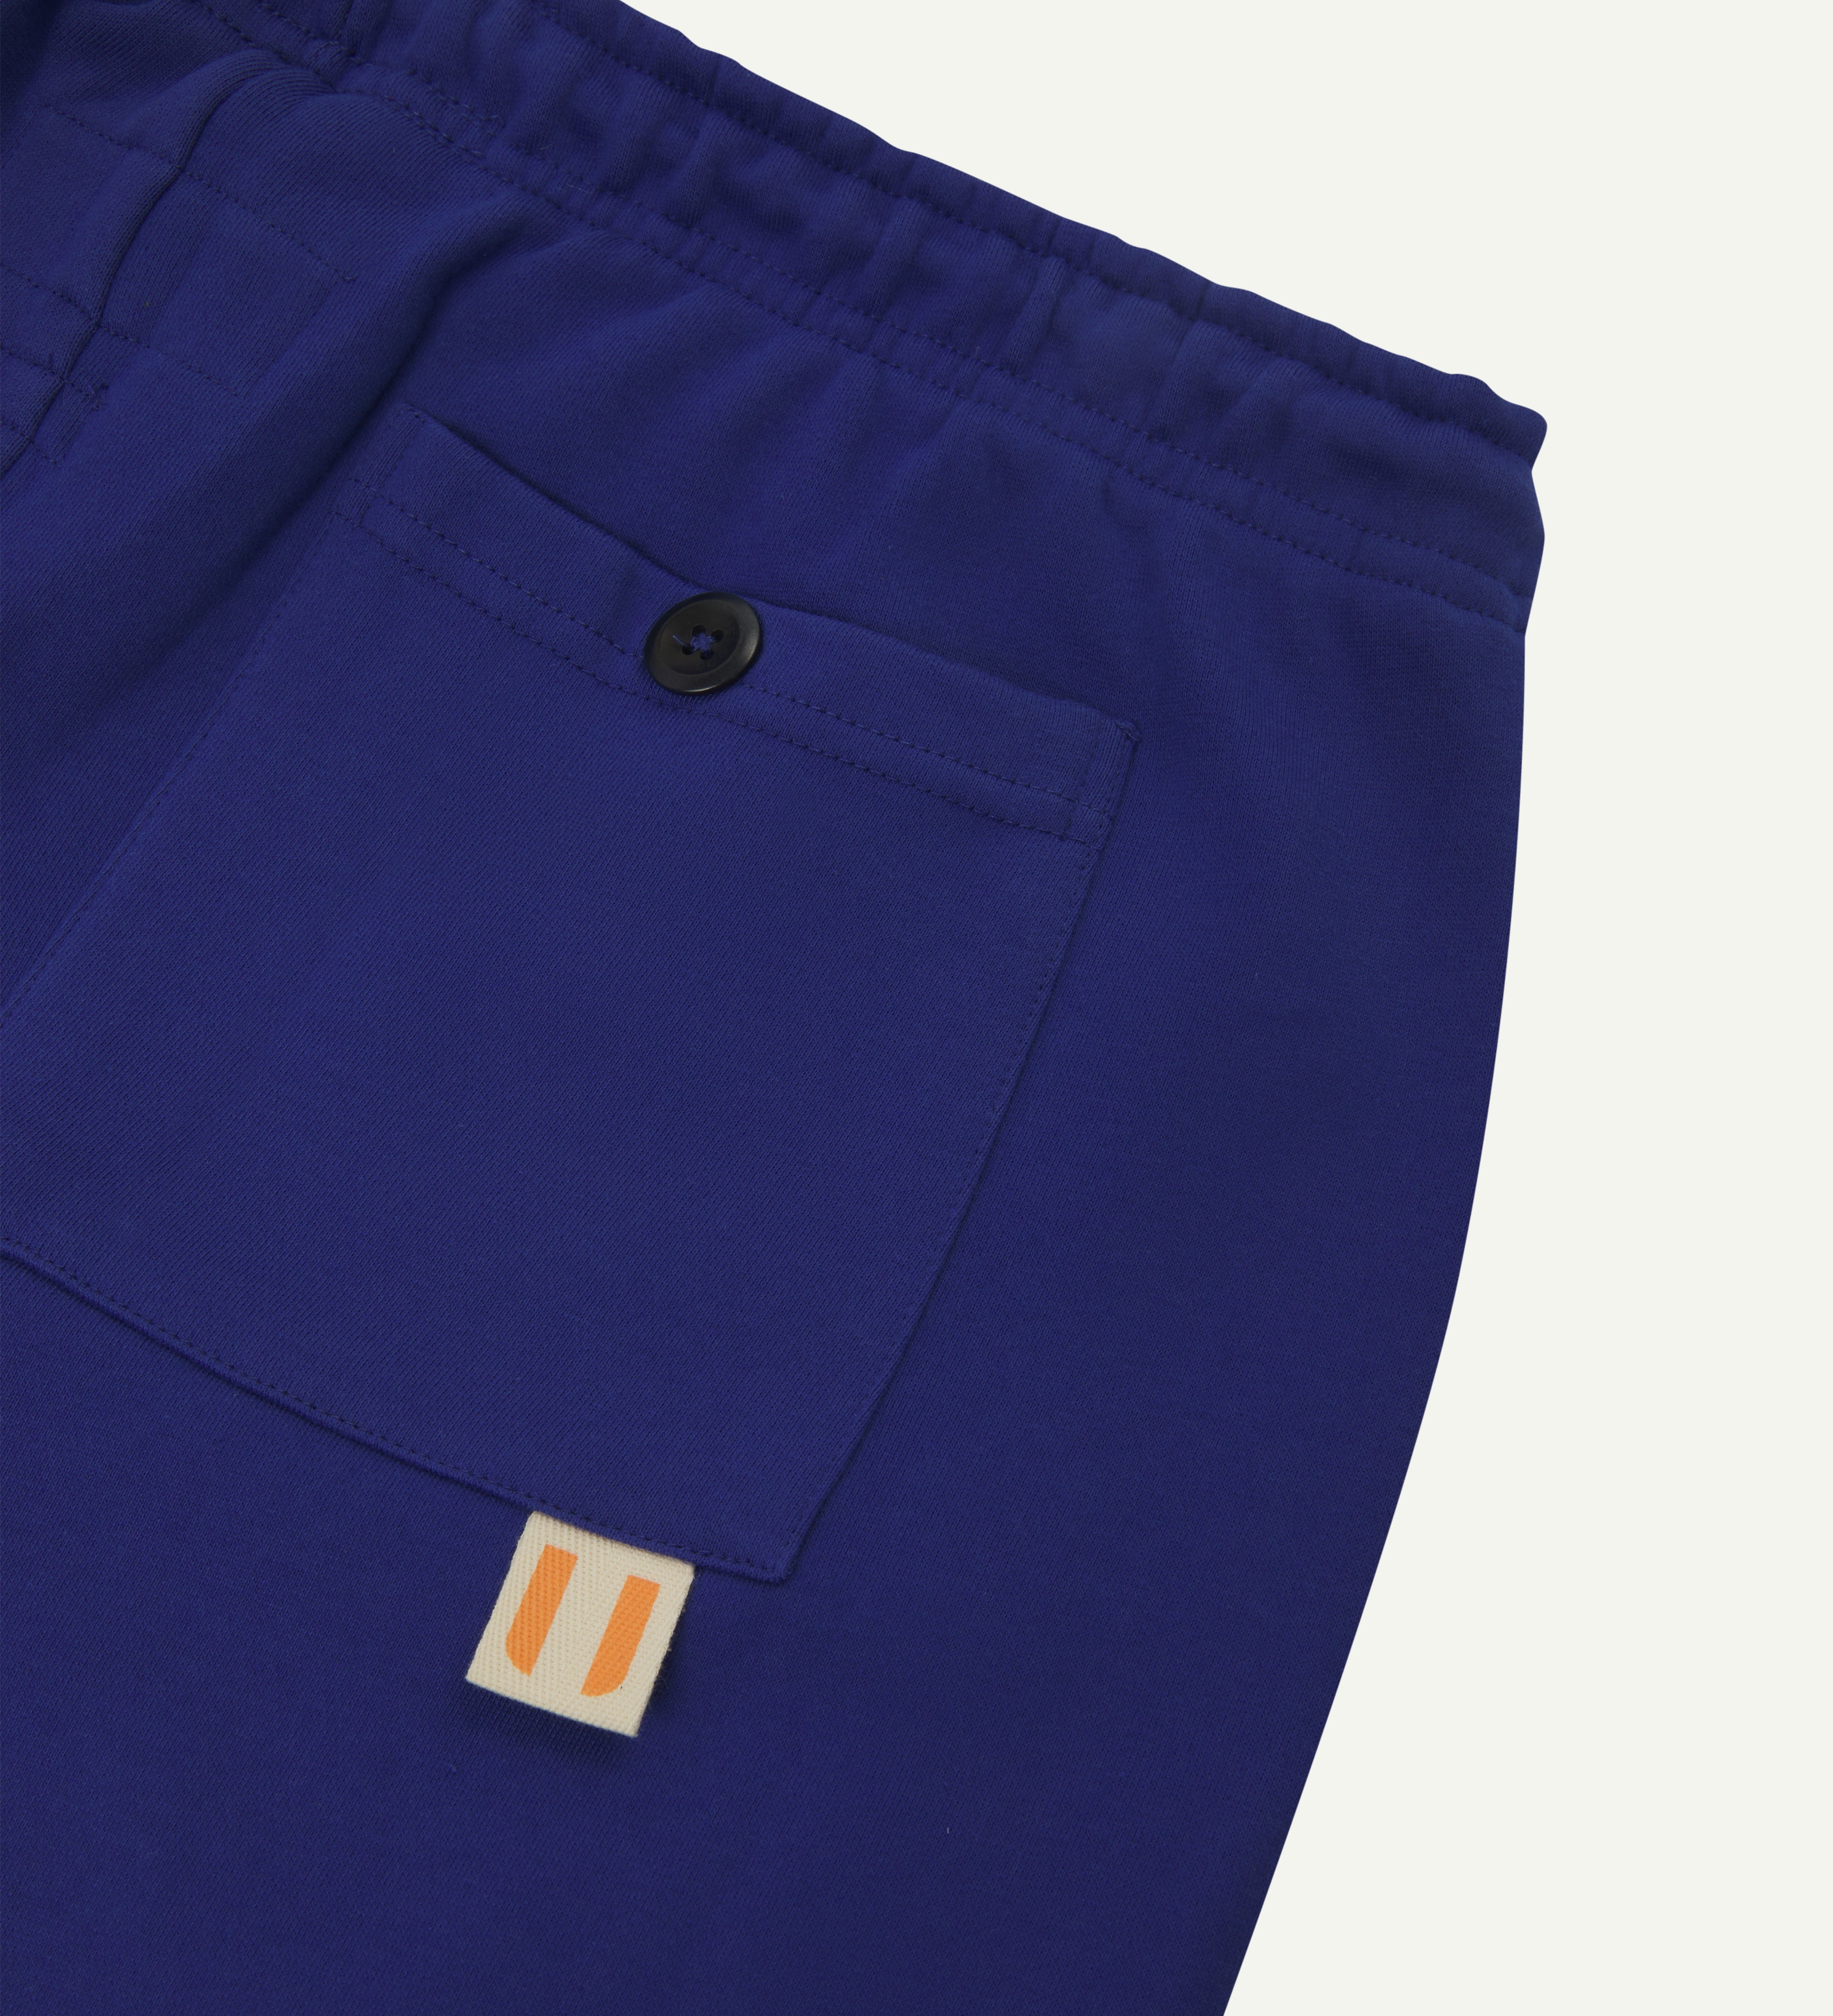 Back close view of bright blue organic cotton Jogging Pants for men by Uskees showing buttoned back pocket and logo label.